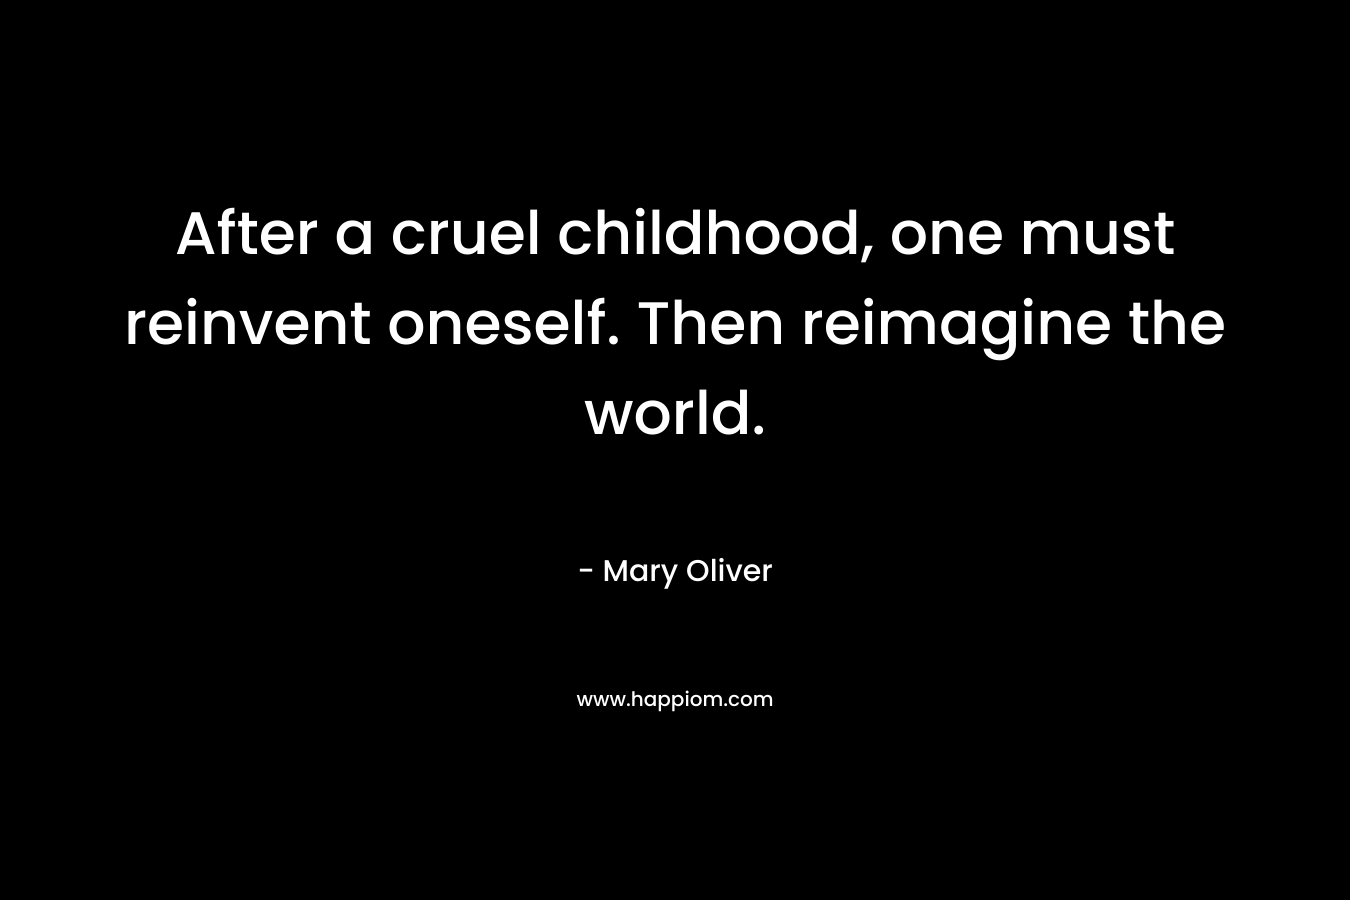 After a cruel childhood, one must reinvent oneself. Then reimagine the world. – Mary Oliver